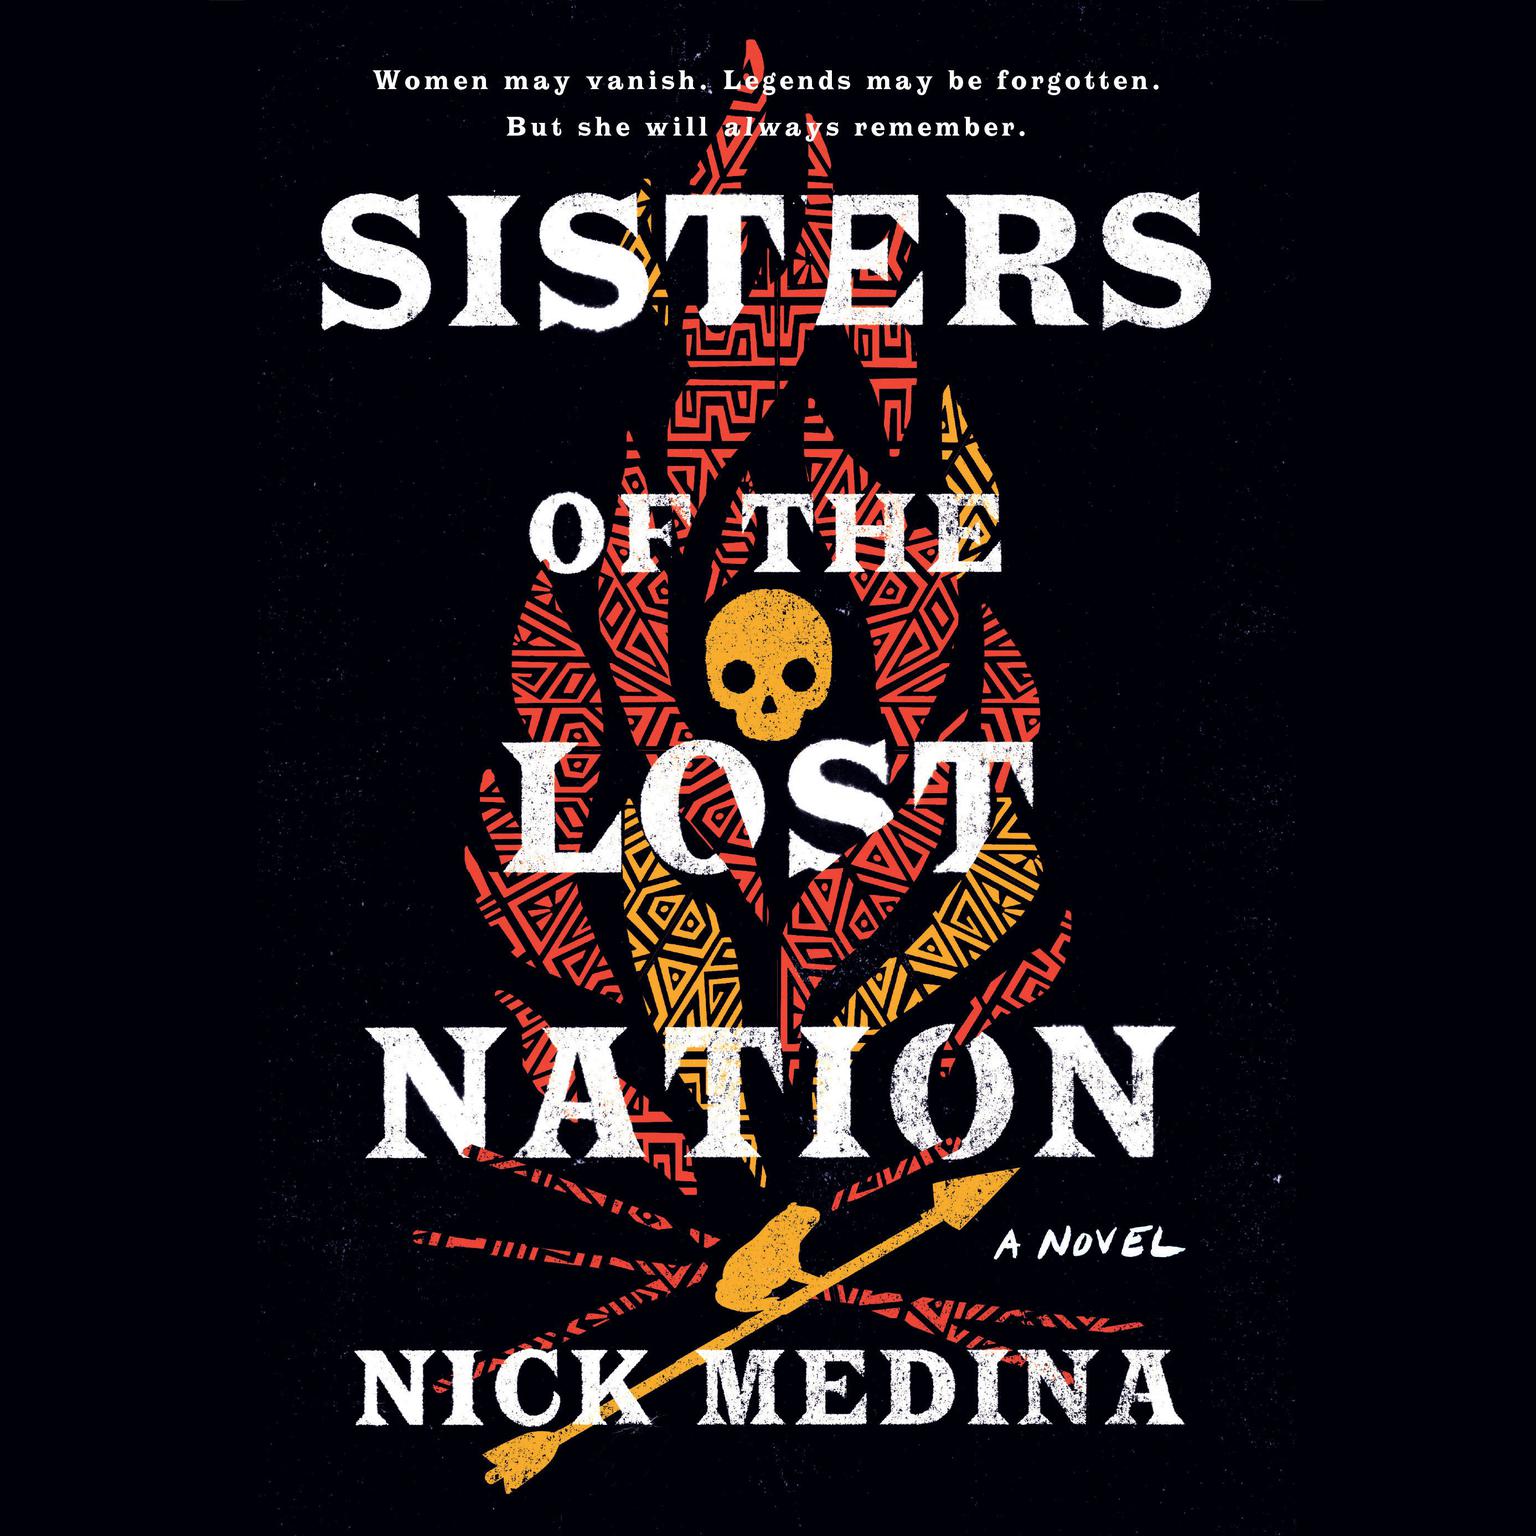 Sisters of the Lost Nation Audiobook, by Nick Medina